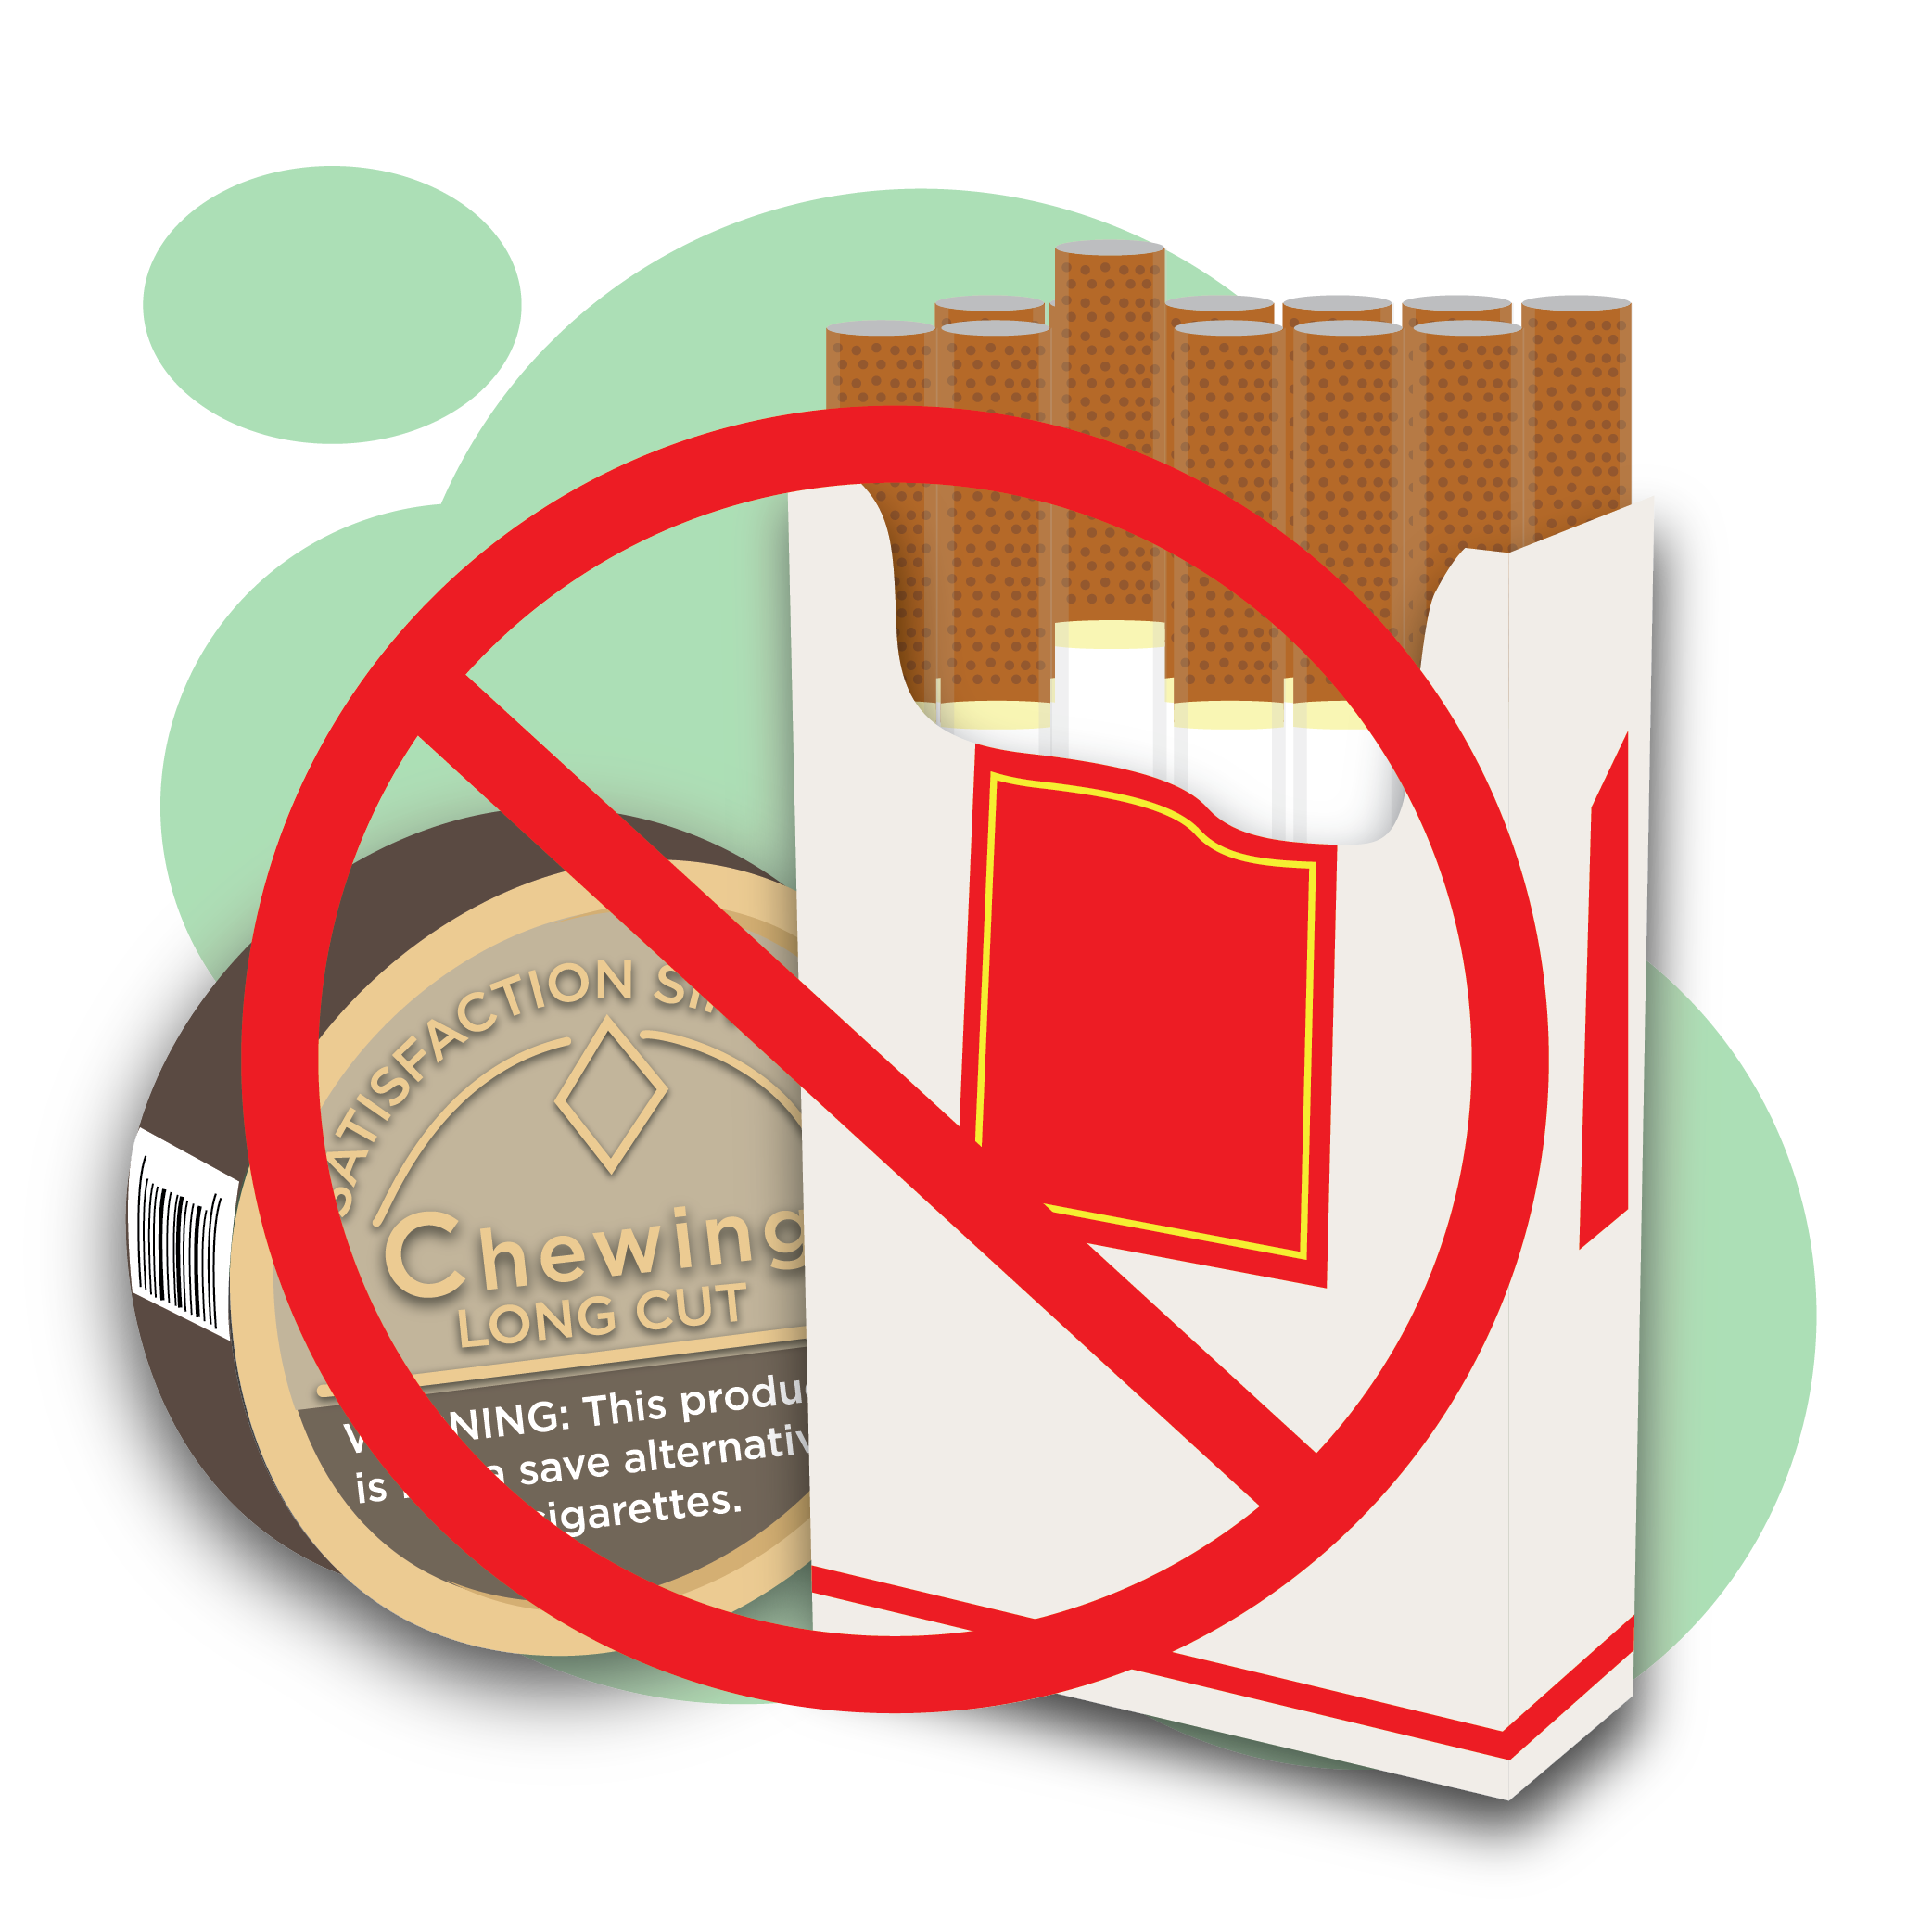 Illustration of a pack of cigarettes and a can of chewing tobacco with a red crossed circle over the top to indicate they should be avoided